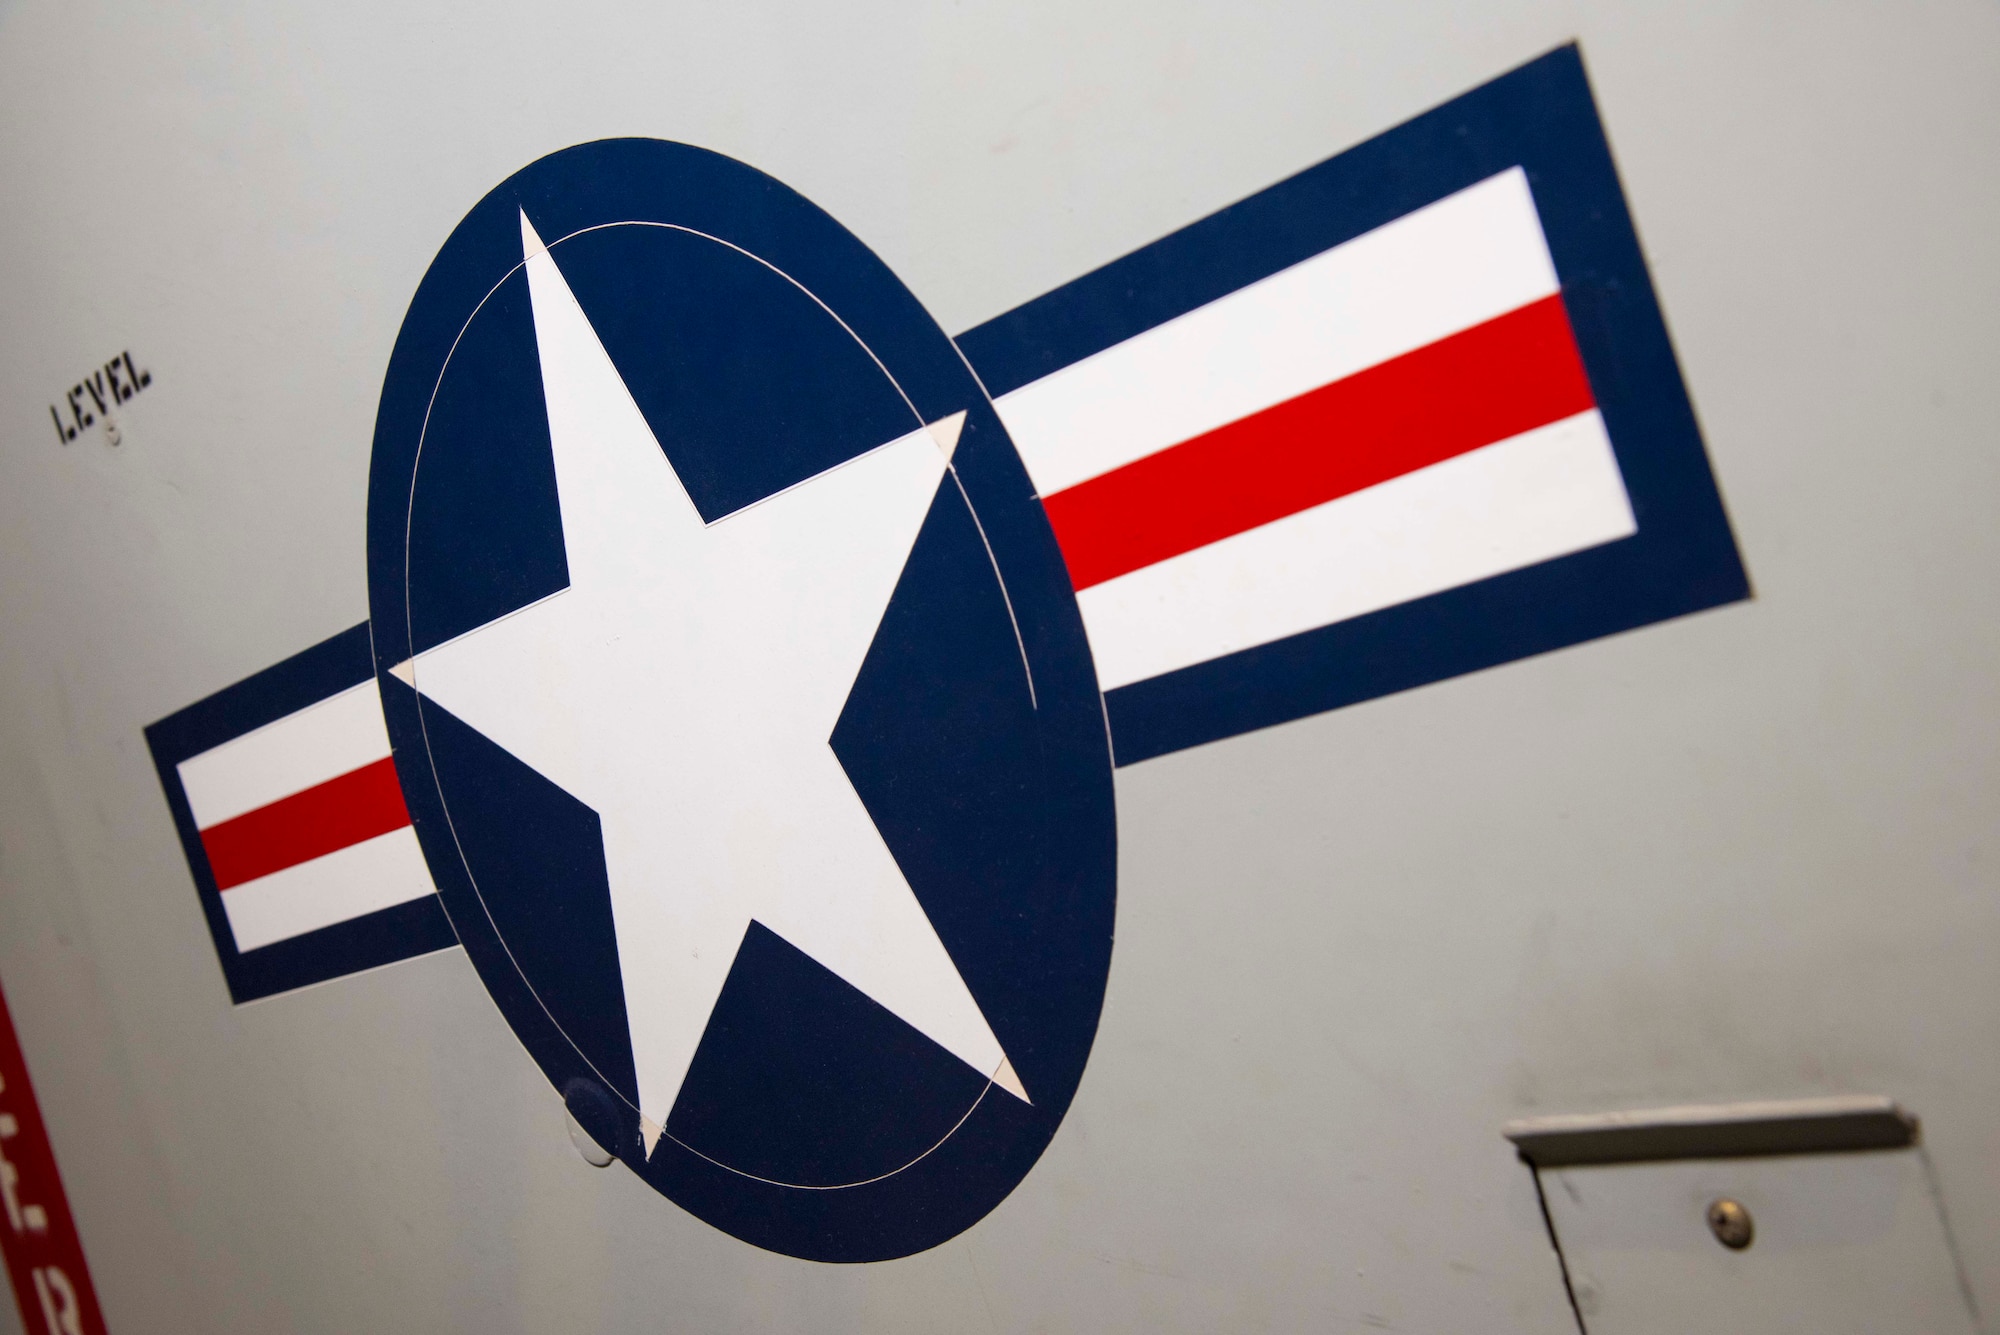 DAYTON, Ohio -- North American Rockwell OV-10A star and bar insignia in the Southeast Asia War Gallery at the National Museum of the United States Air Force. (U.S. Air Force photo by Ken LaRock)